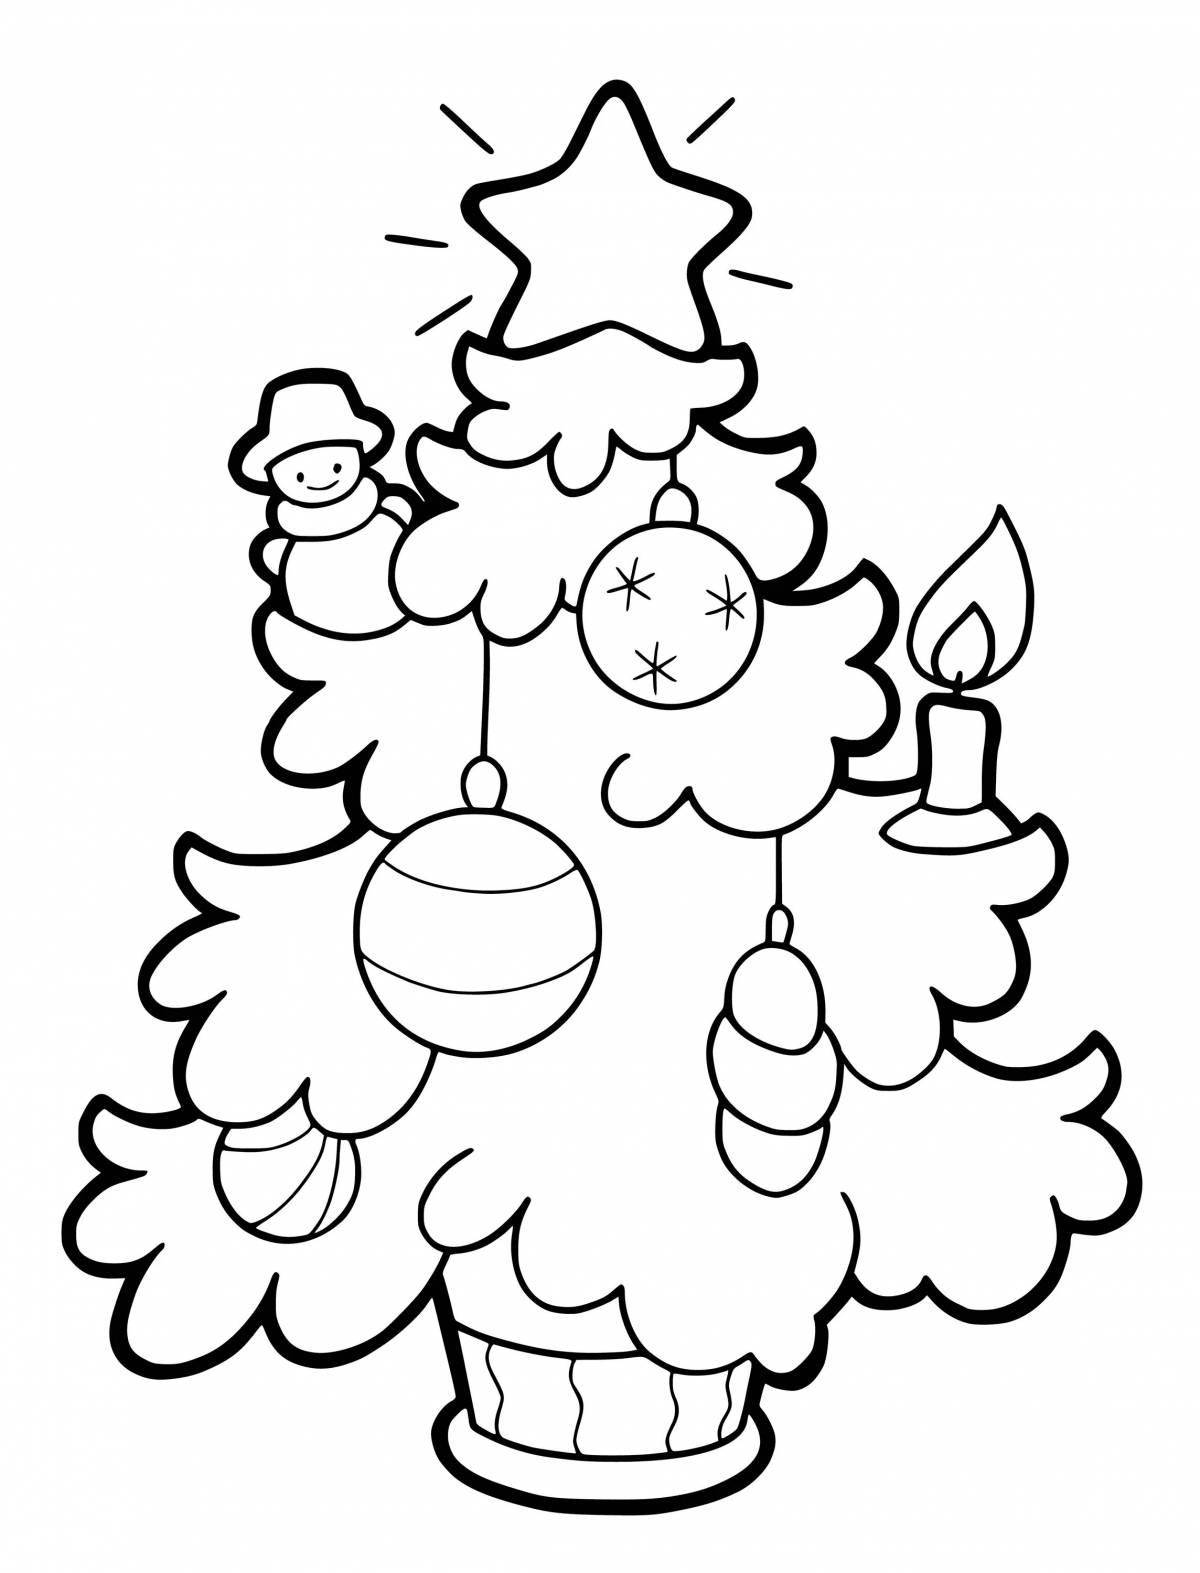 Sparkling Christmas tree coloring book for 5-6 year olds